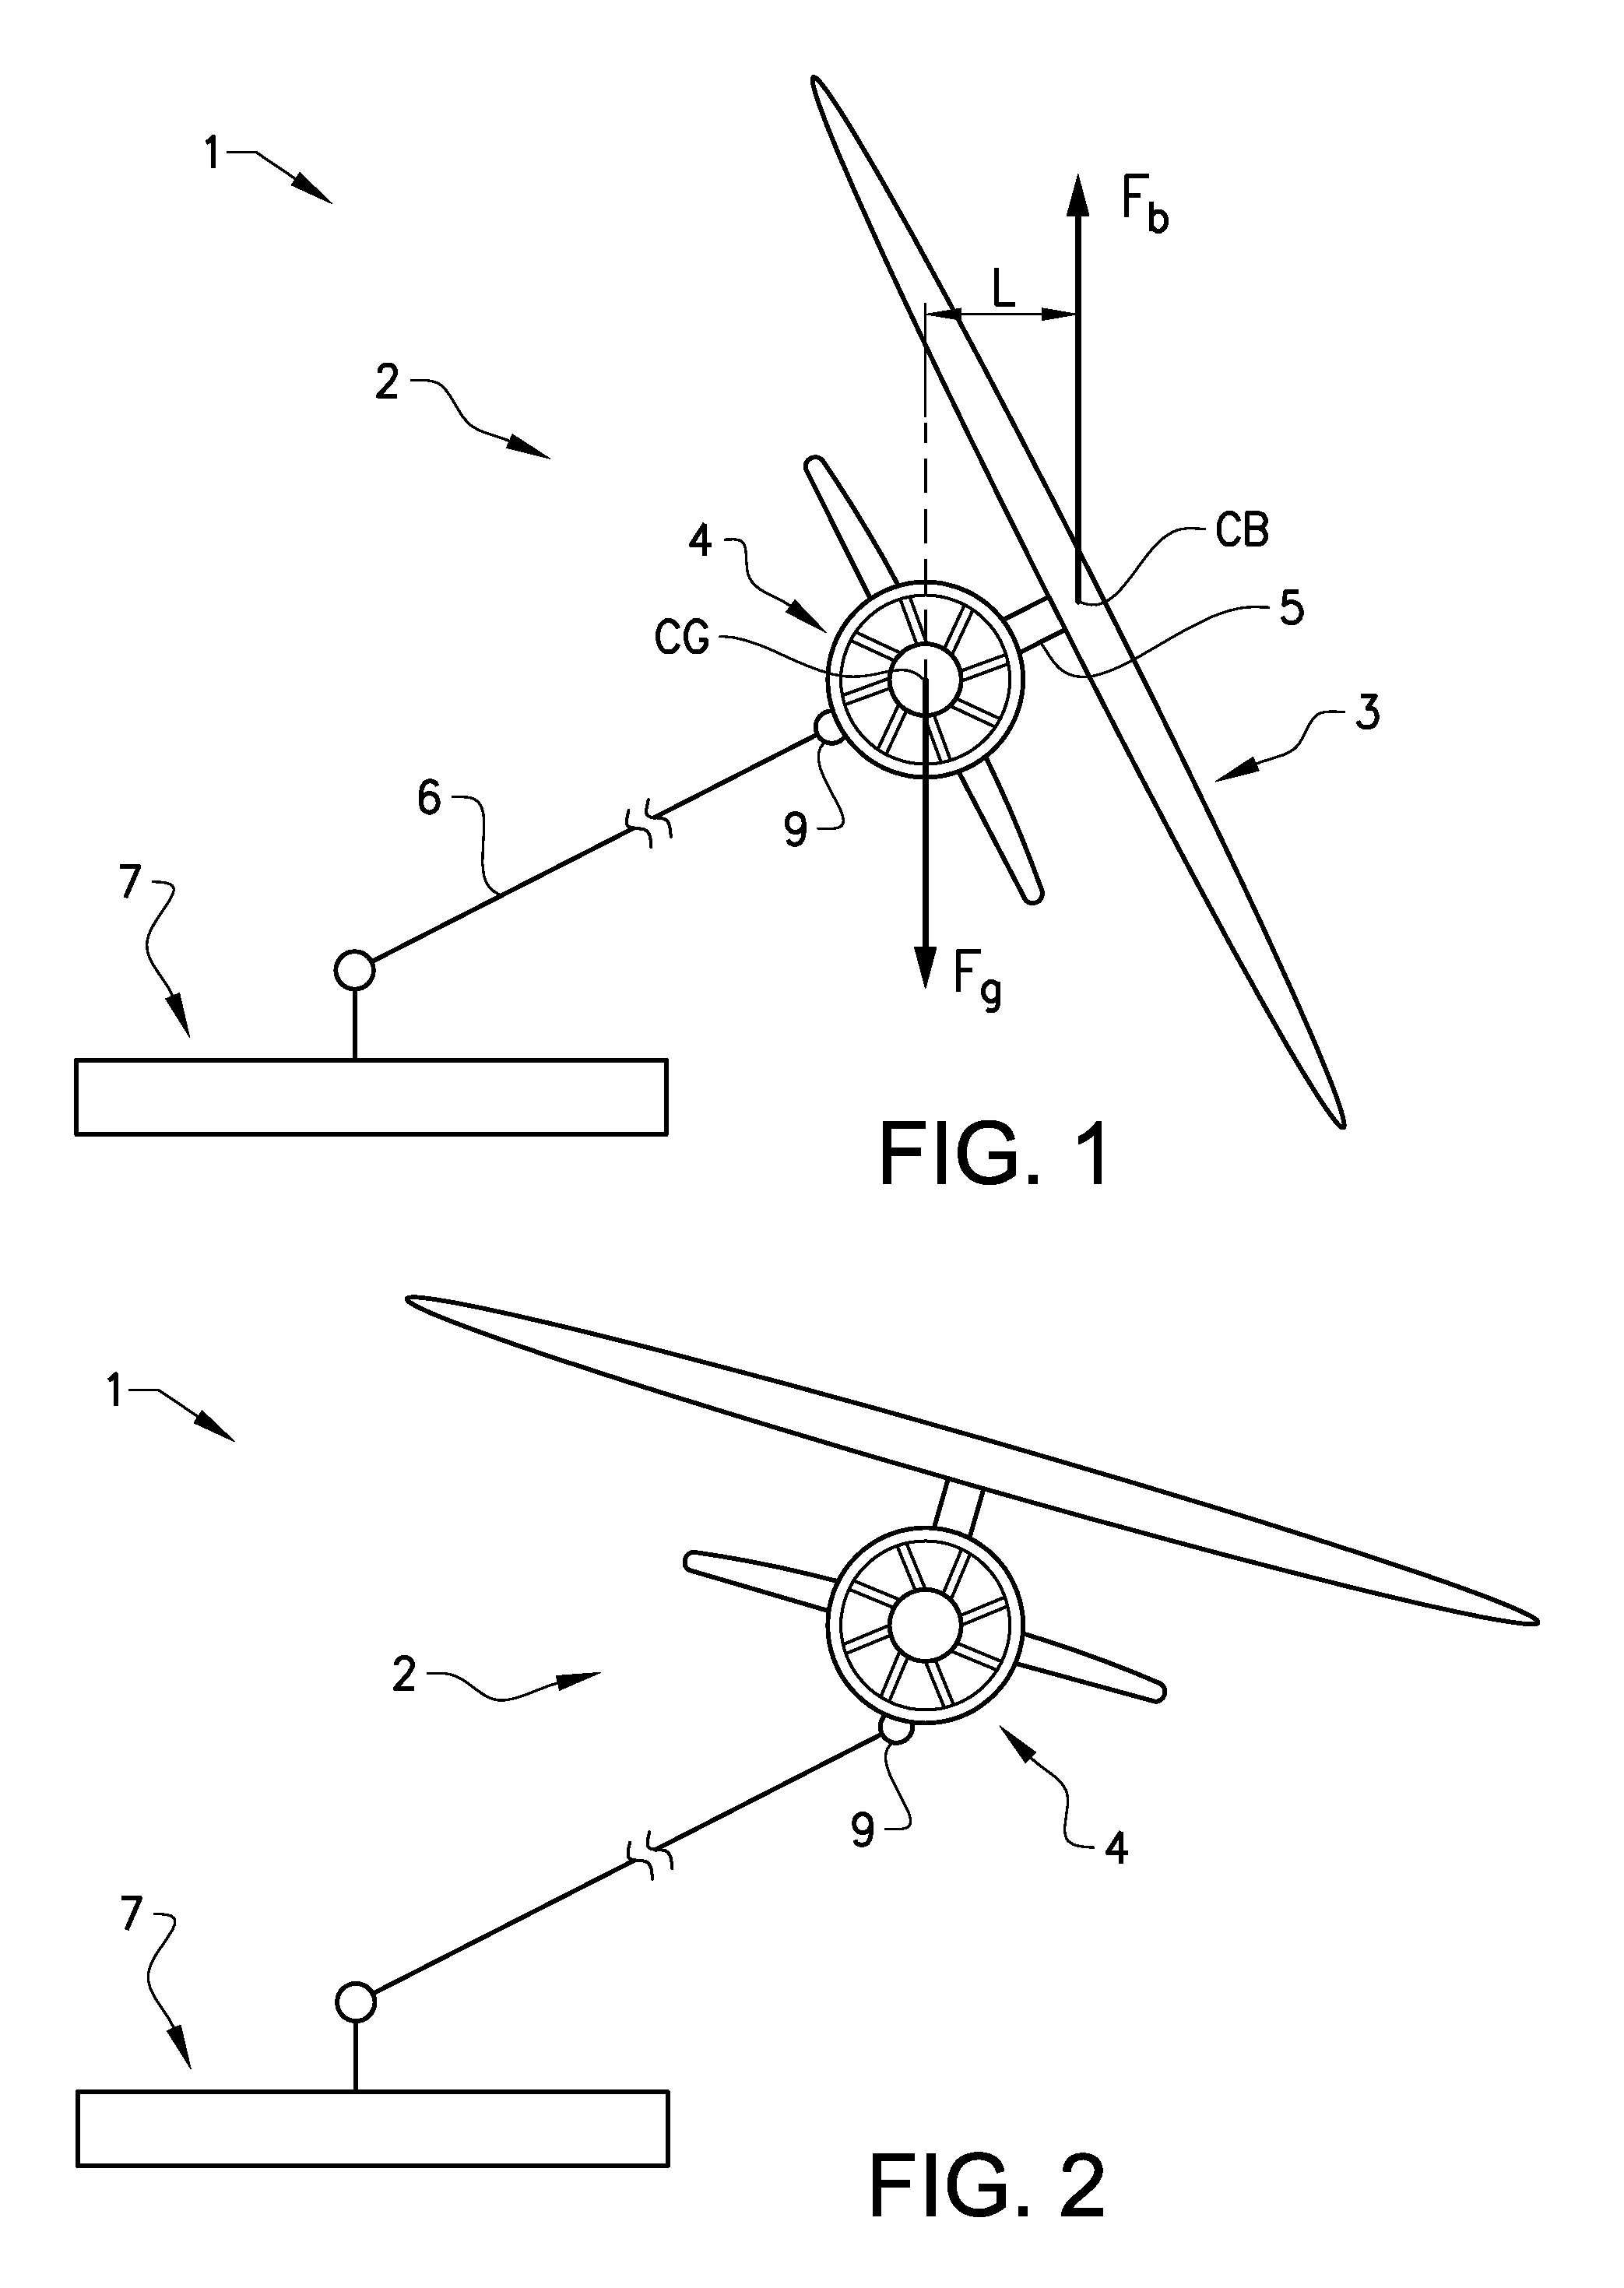 Wing and turbine configuration for power plant